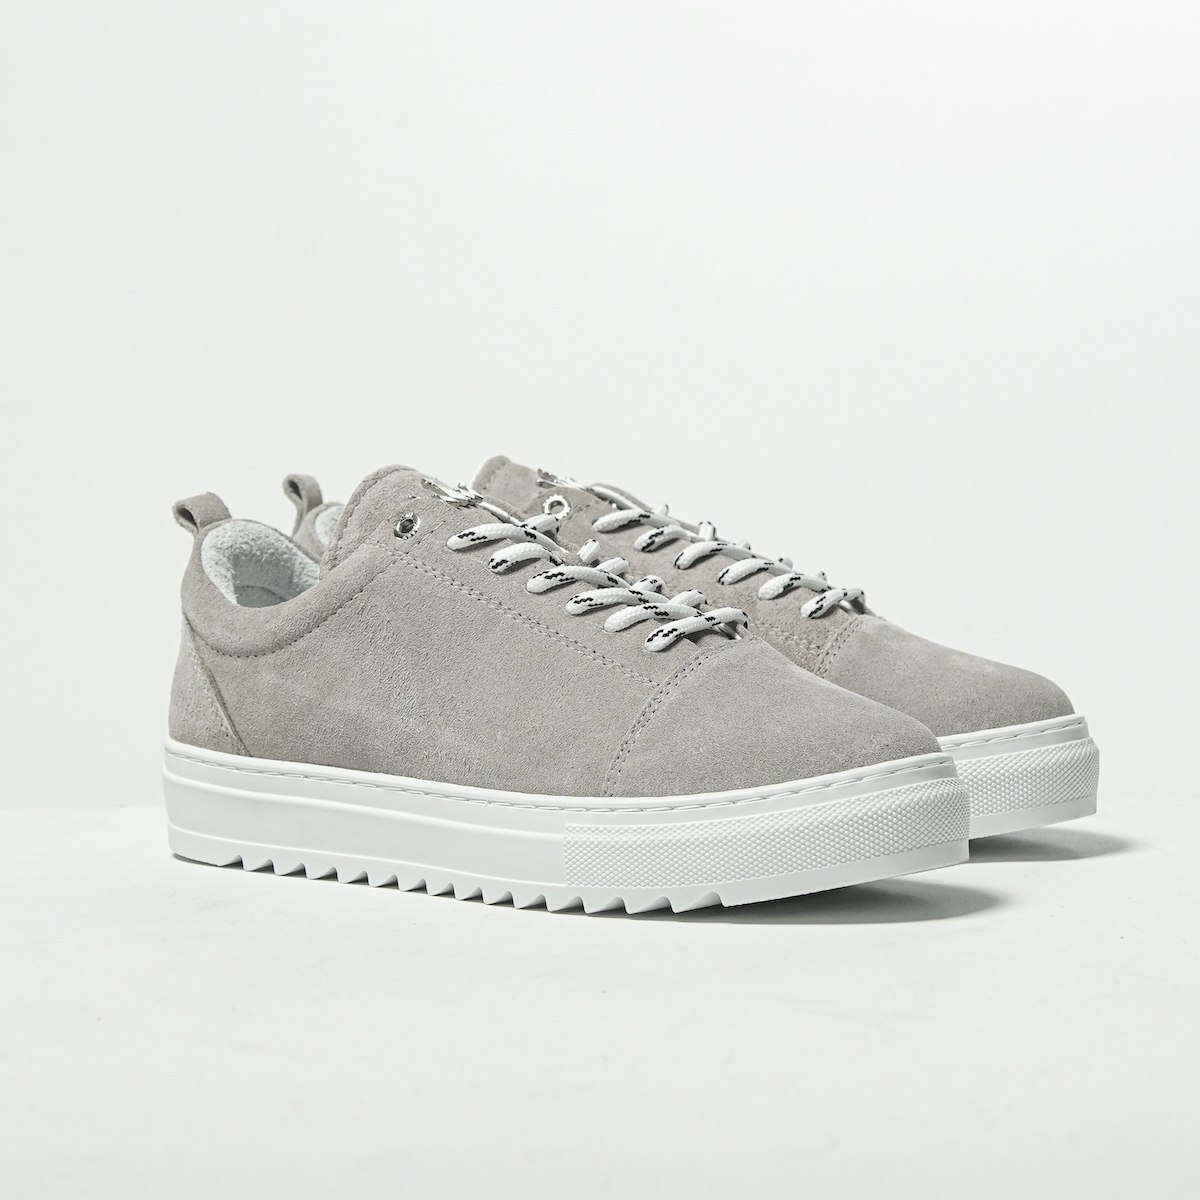 Men’s Low Top Sneakers Genuine Leather Shoes Grey | Martin Valen